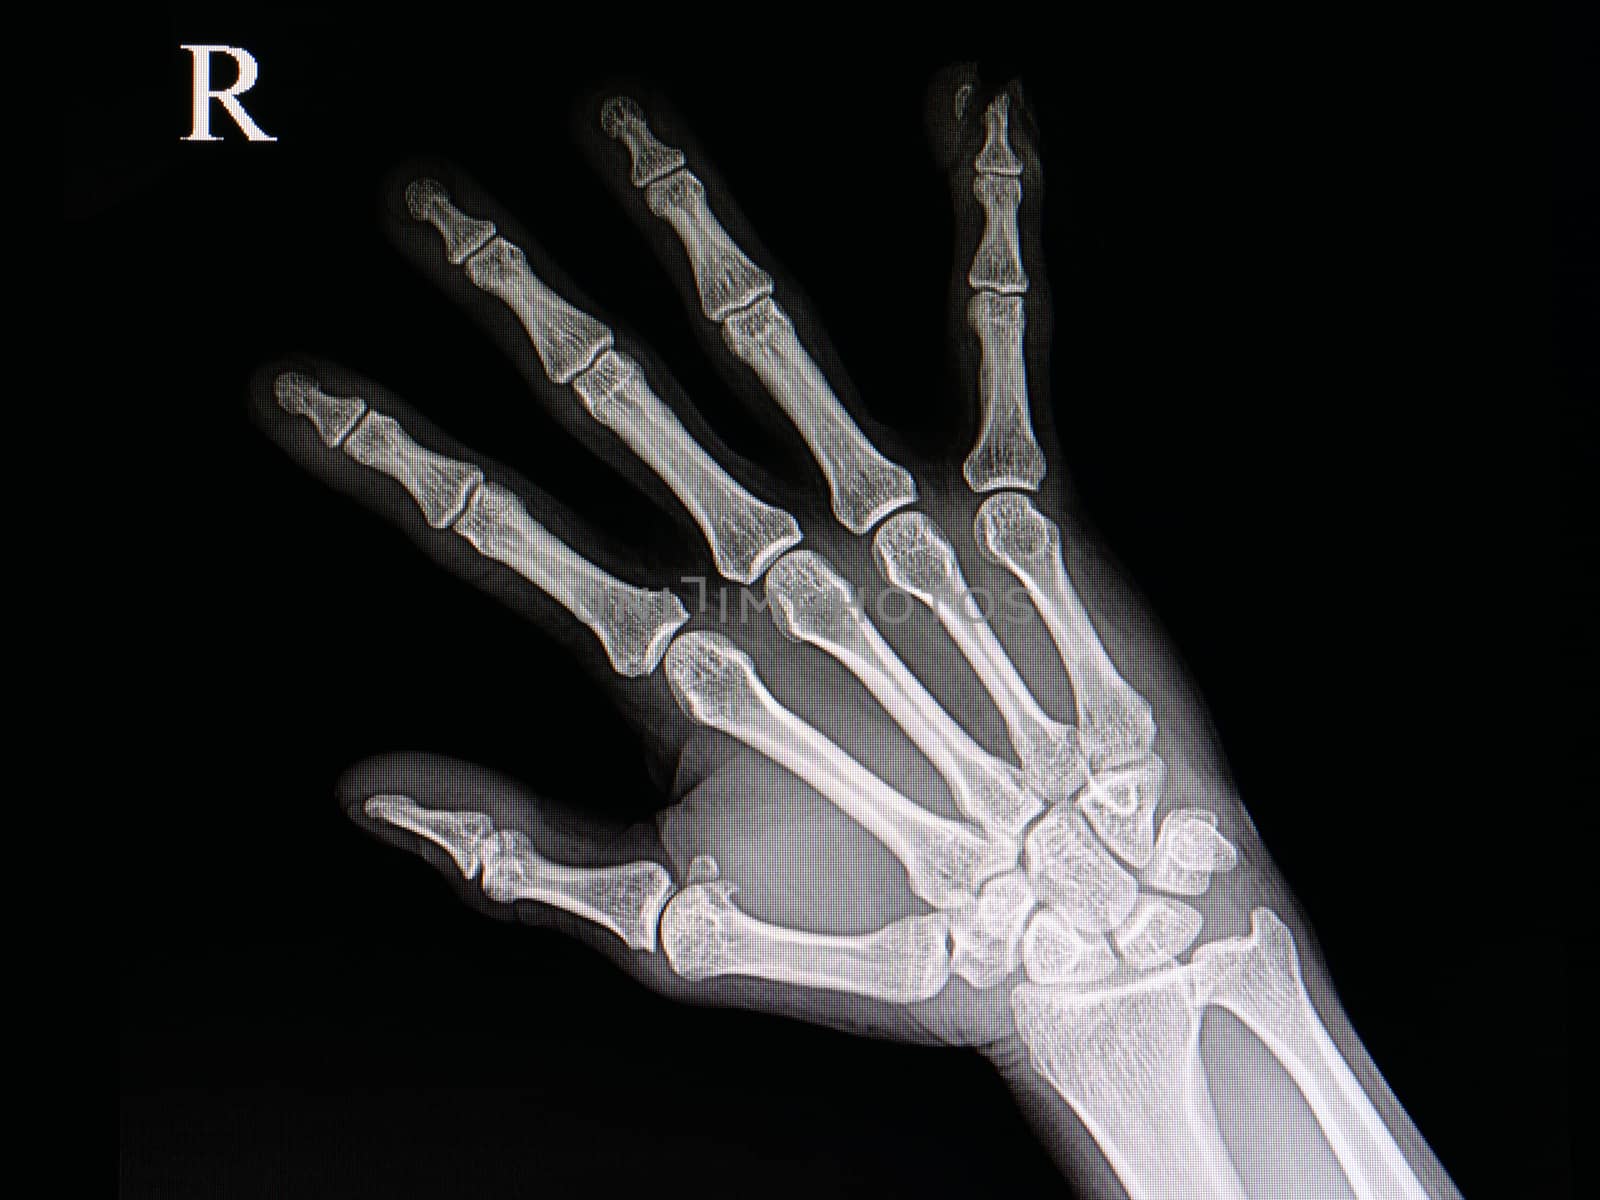 xray of a hand of a patient with accidental traumatic amputation of little finger tip